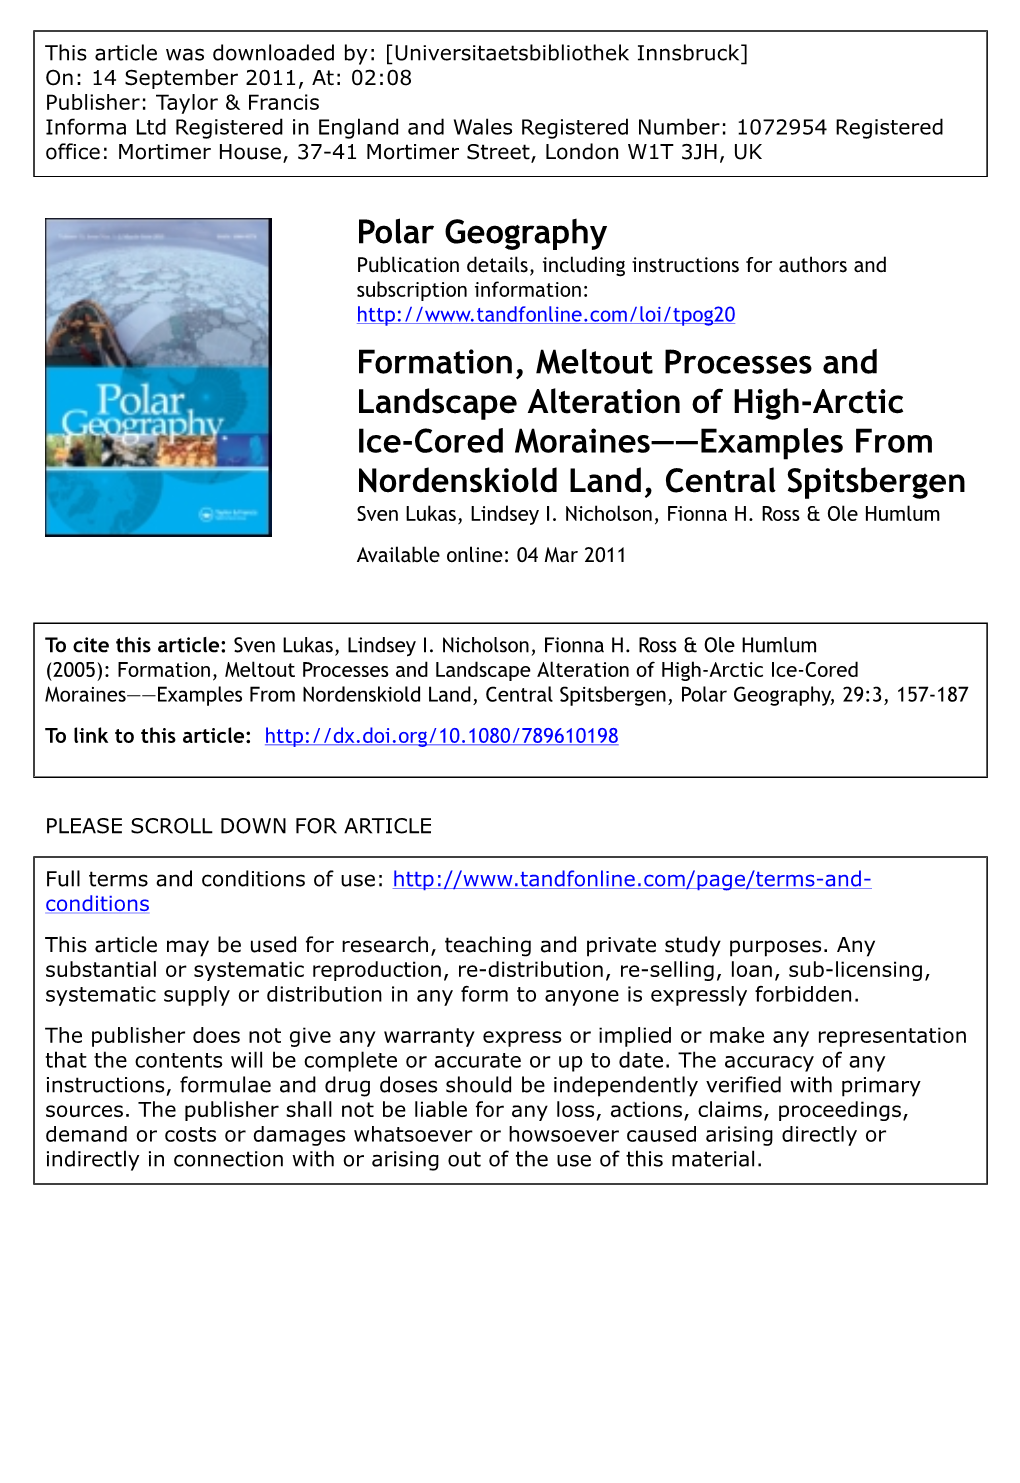 Formation, Meltout Processes and Landscape Alteration of High-Arctic Ice-Cored Moraines——Examples from Nordenskiold Land, Central Spitsbergen Sven Lukas, Lindsey I